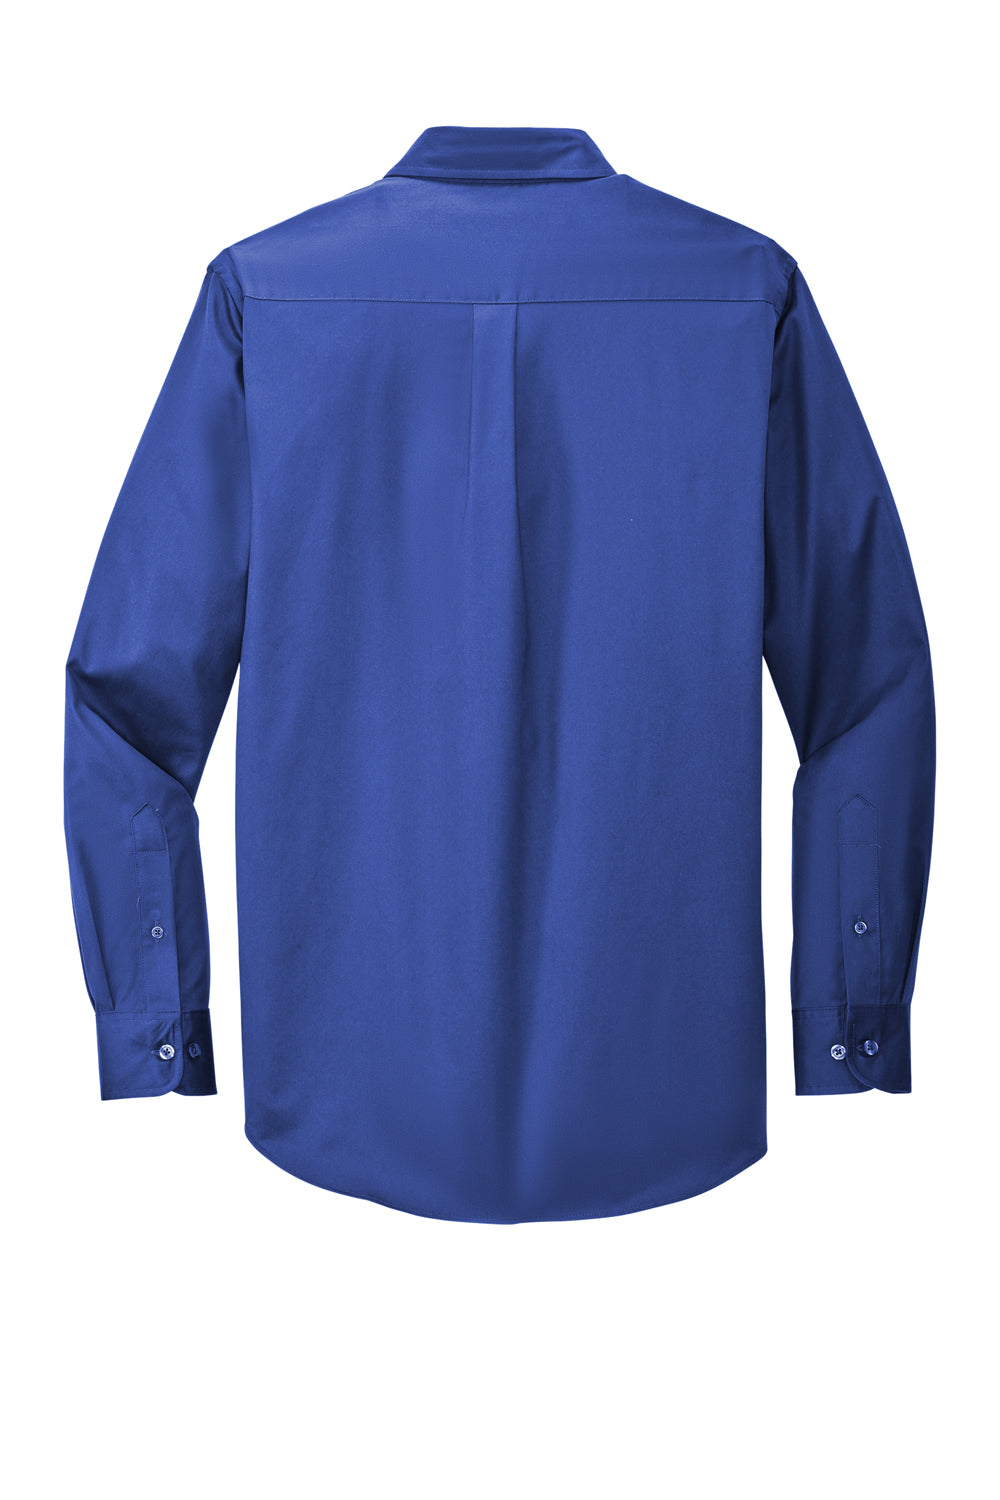 Port Authority S608/TLS608/S608ES Mens Easy Care Wrinkle Resistant Long Sleeve Button Down Shirt w/ Pocket Royal Blue Flat Back